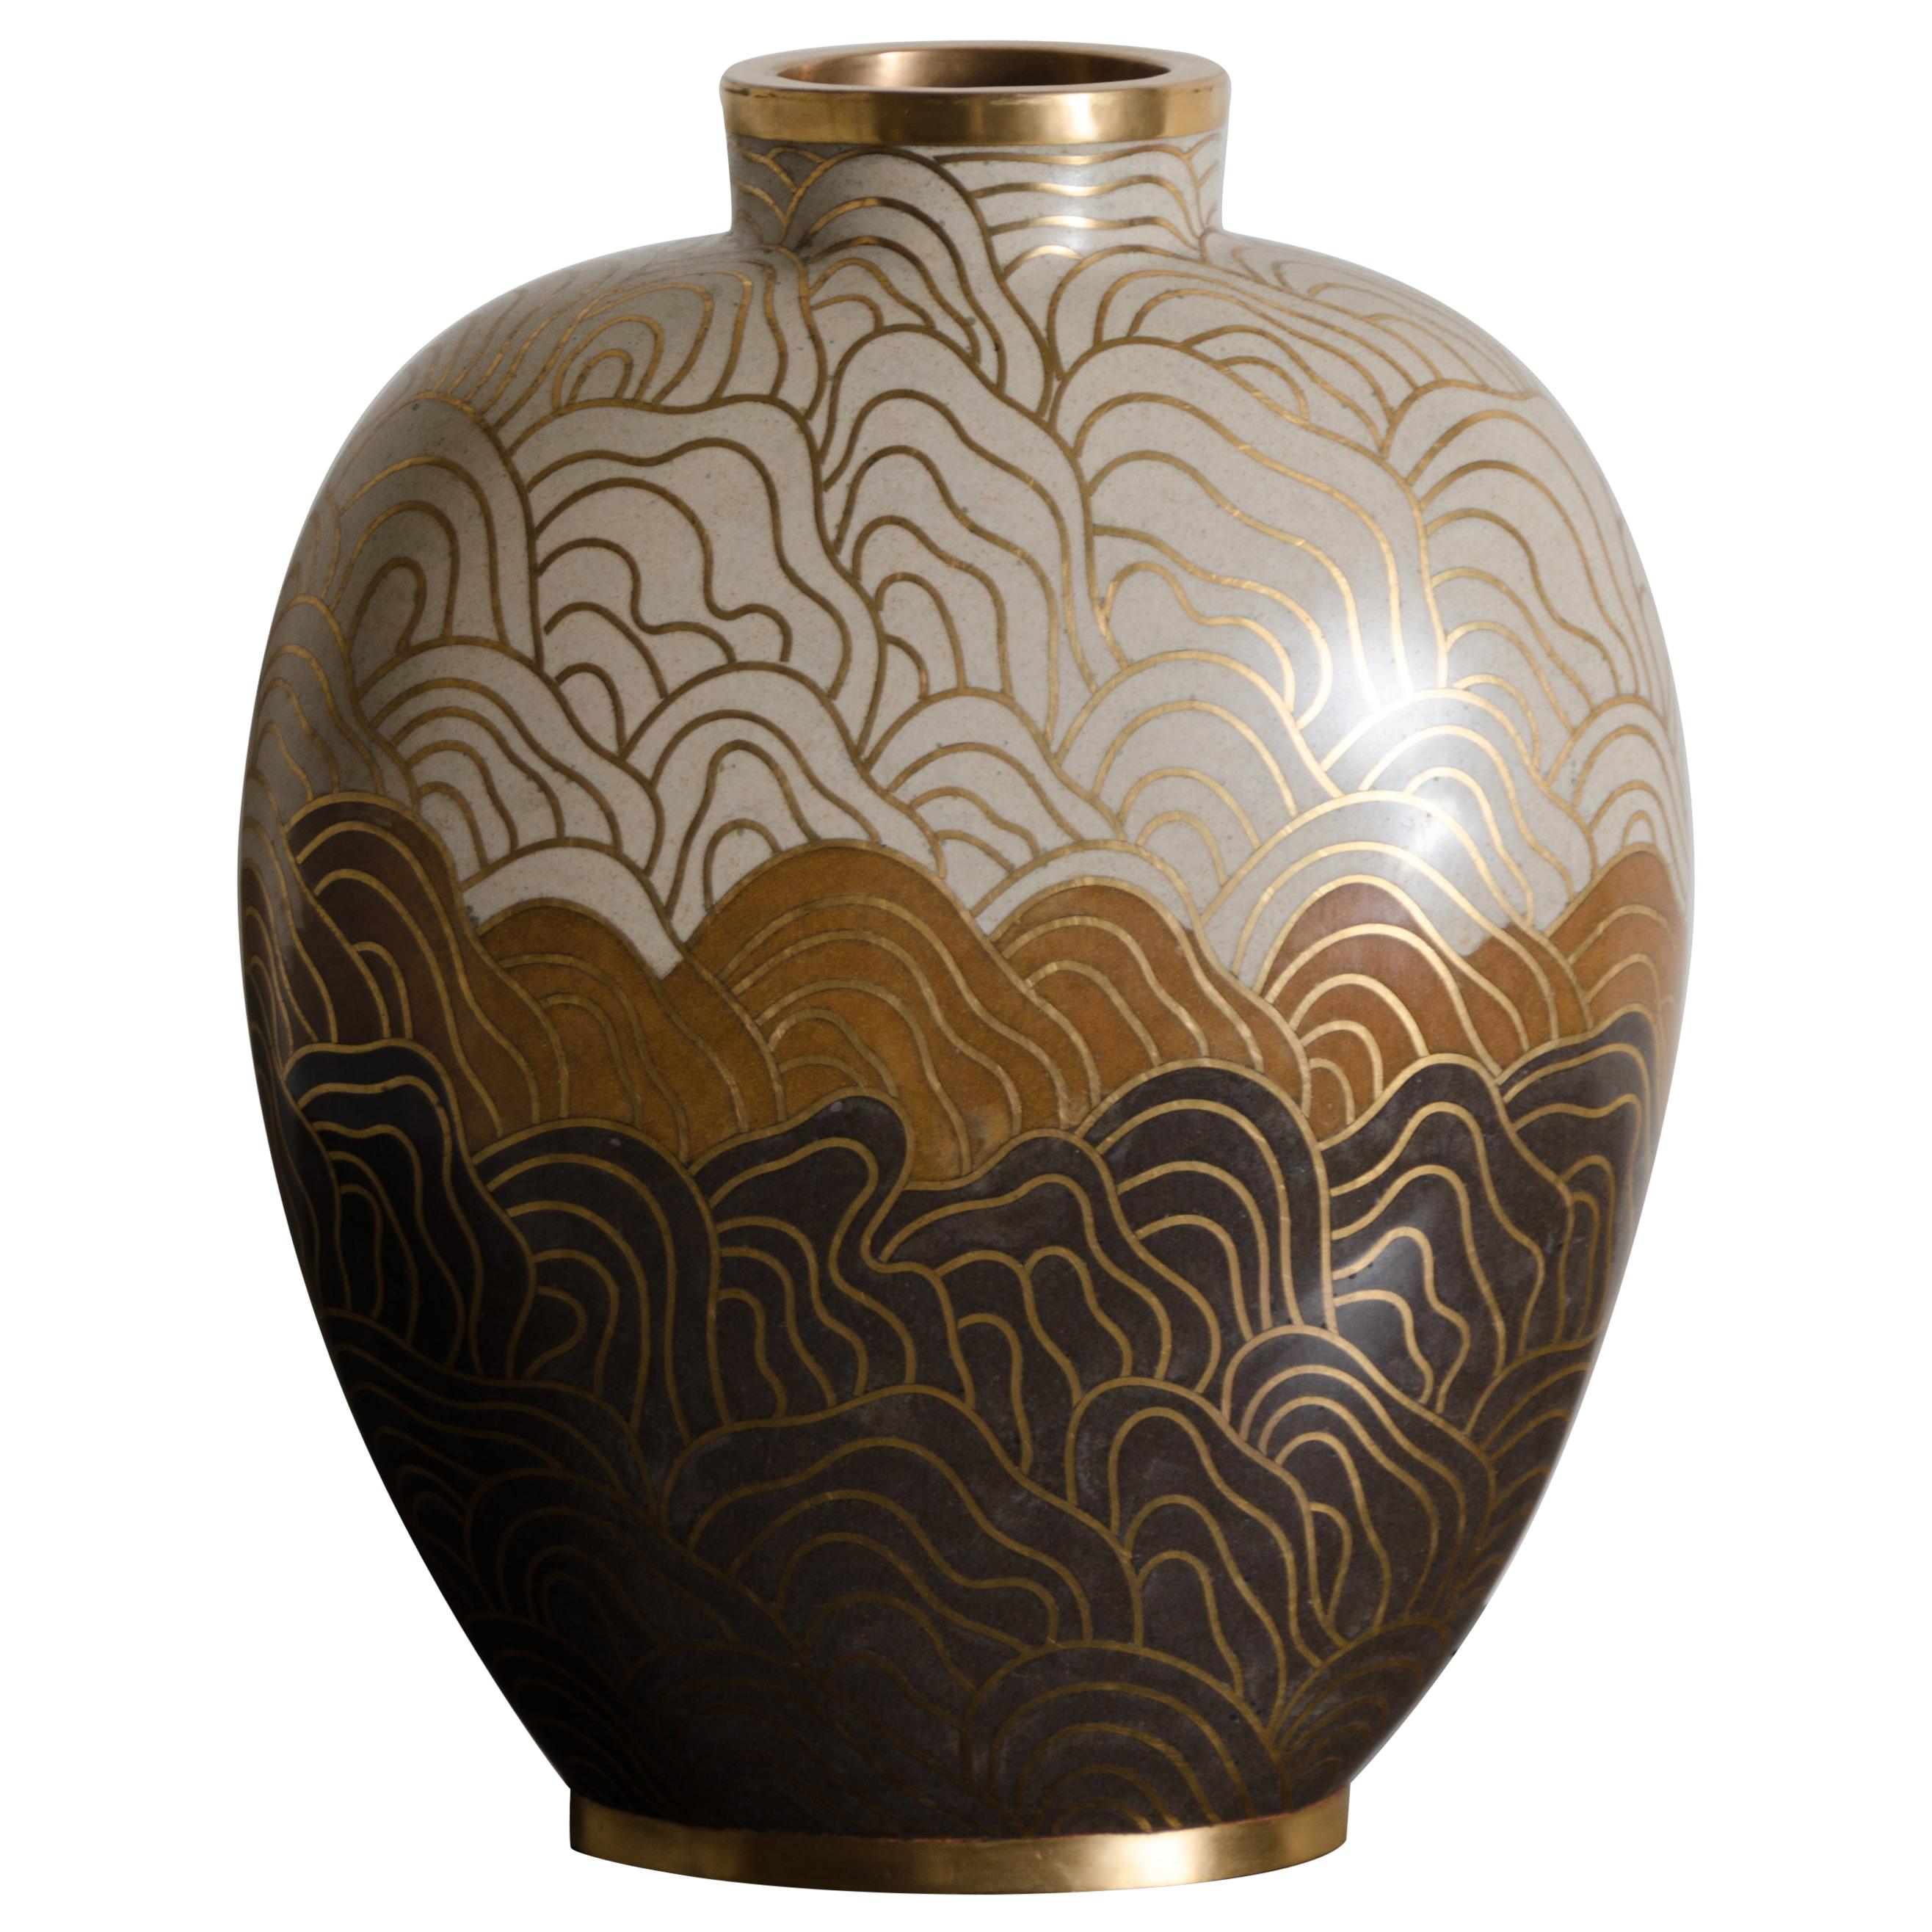 Snuff Vase, Shan Design, Amber by Robert Kuo, Cloisonné, Limited Edition